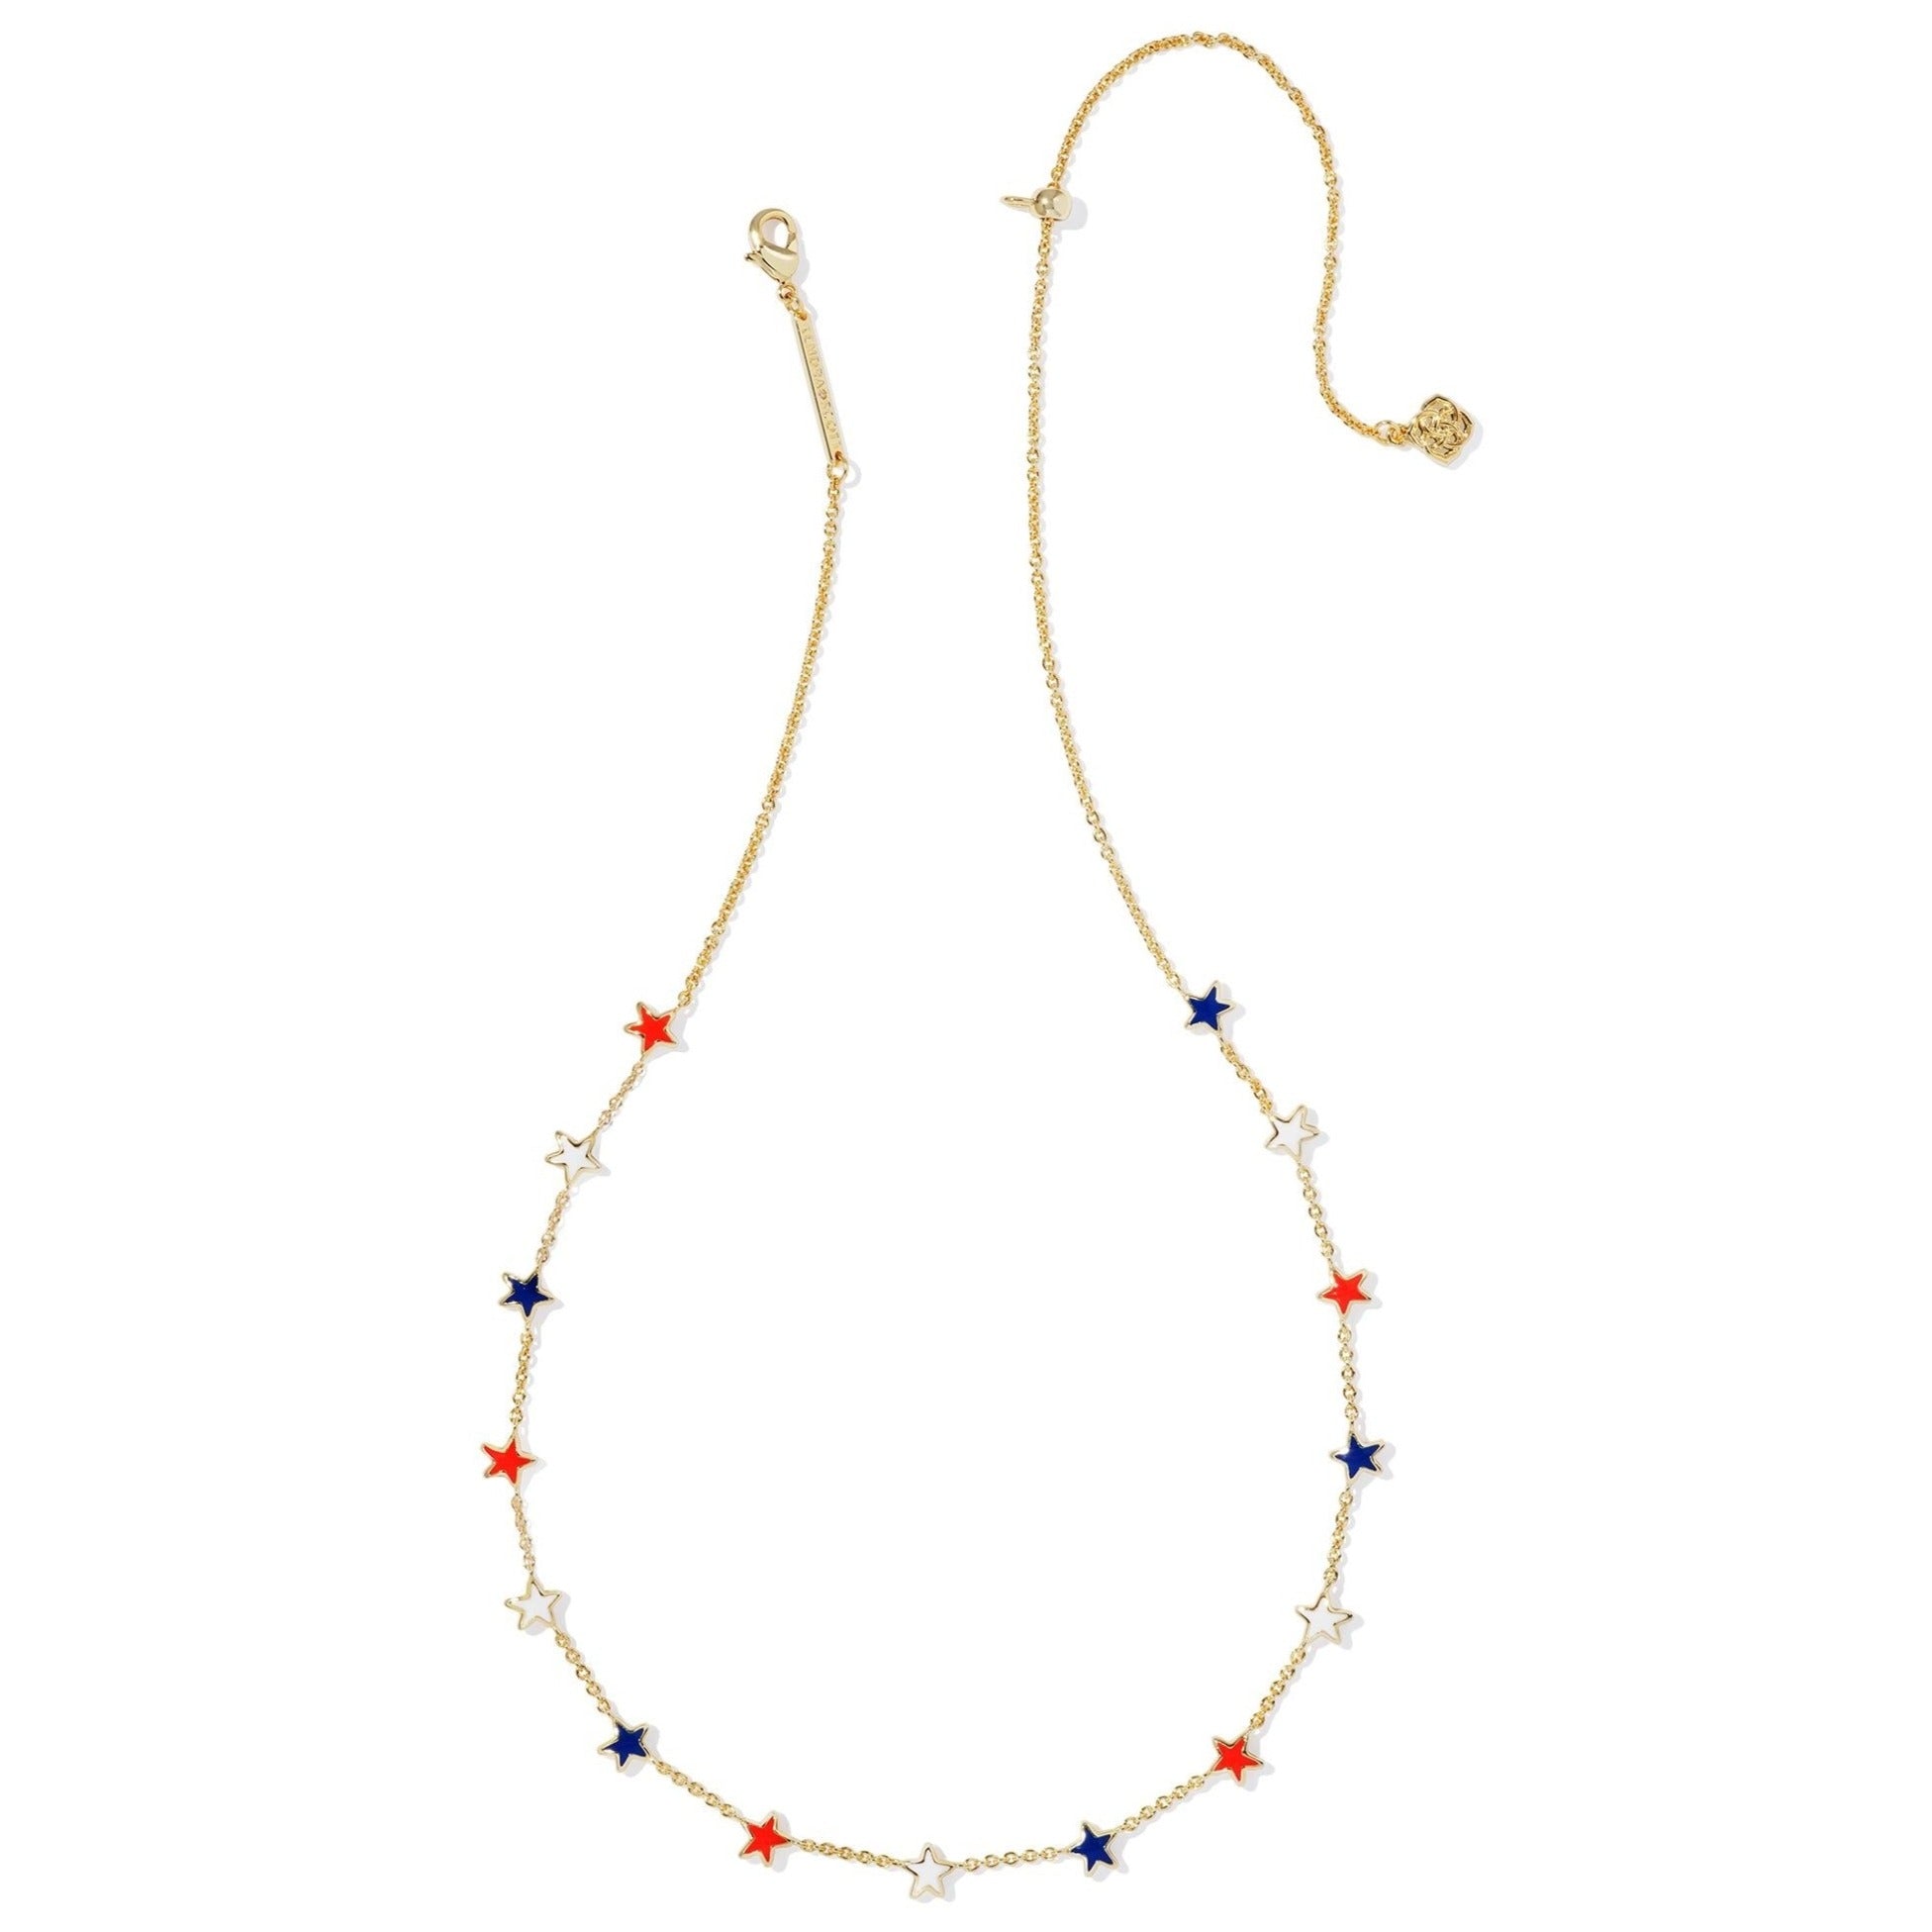 Kendra Scott | Sierra Gold Star Strand Necklace in Red, White, and Blue Mix - Giddy Up Glamour Boutique